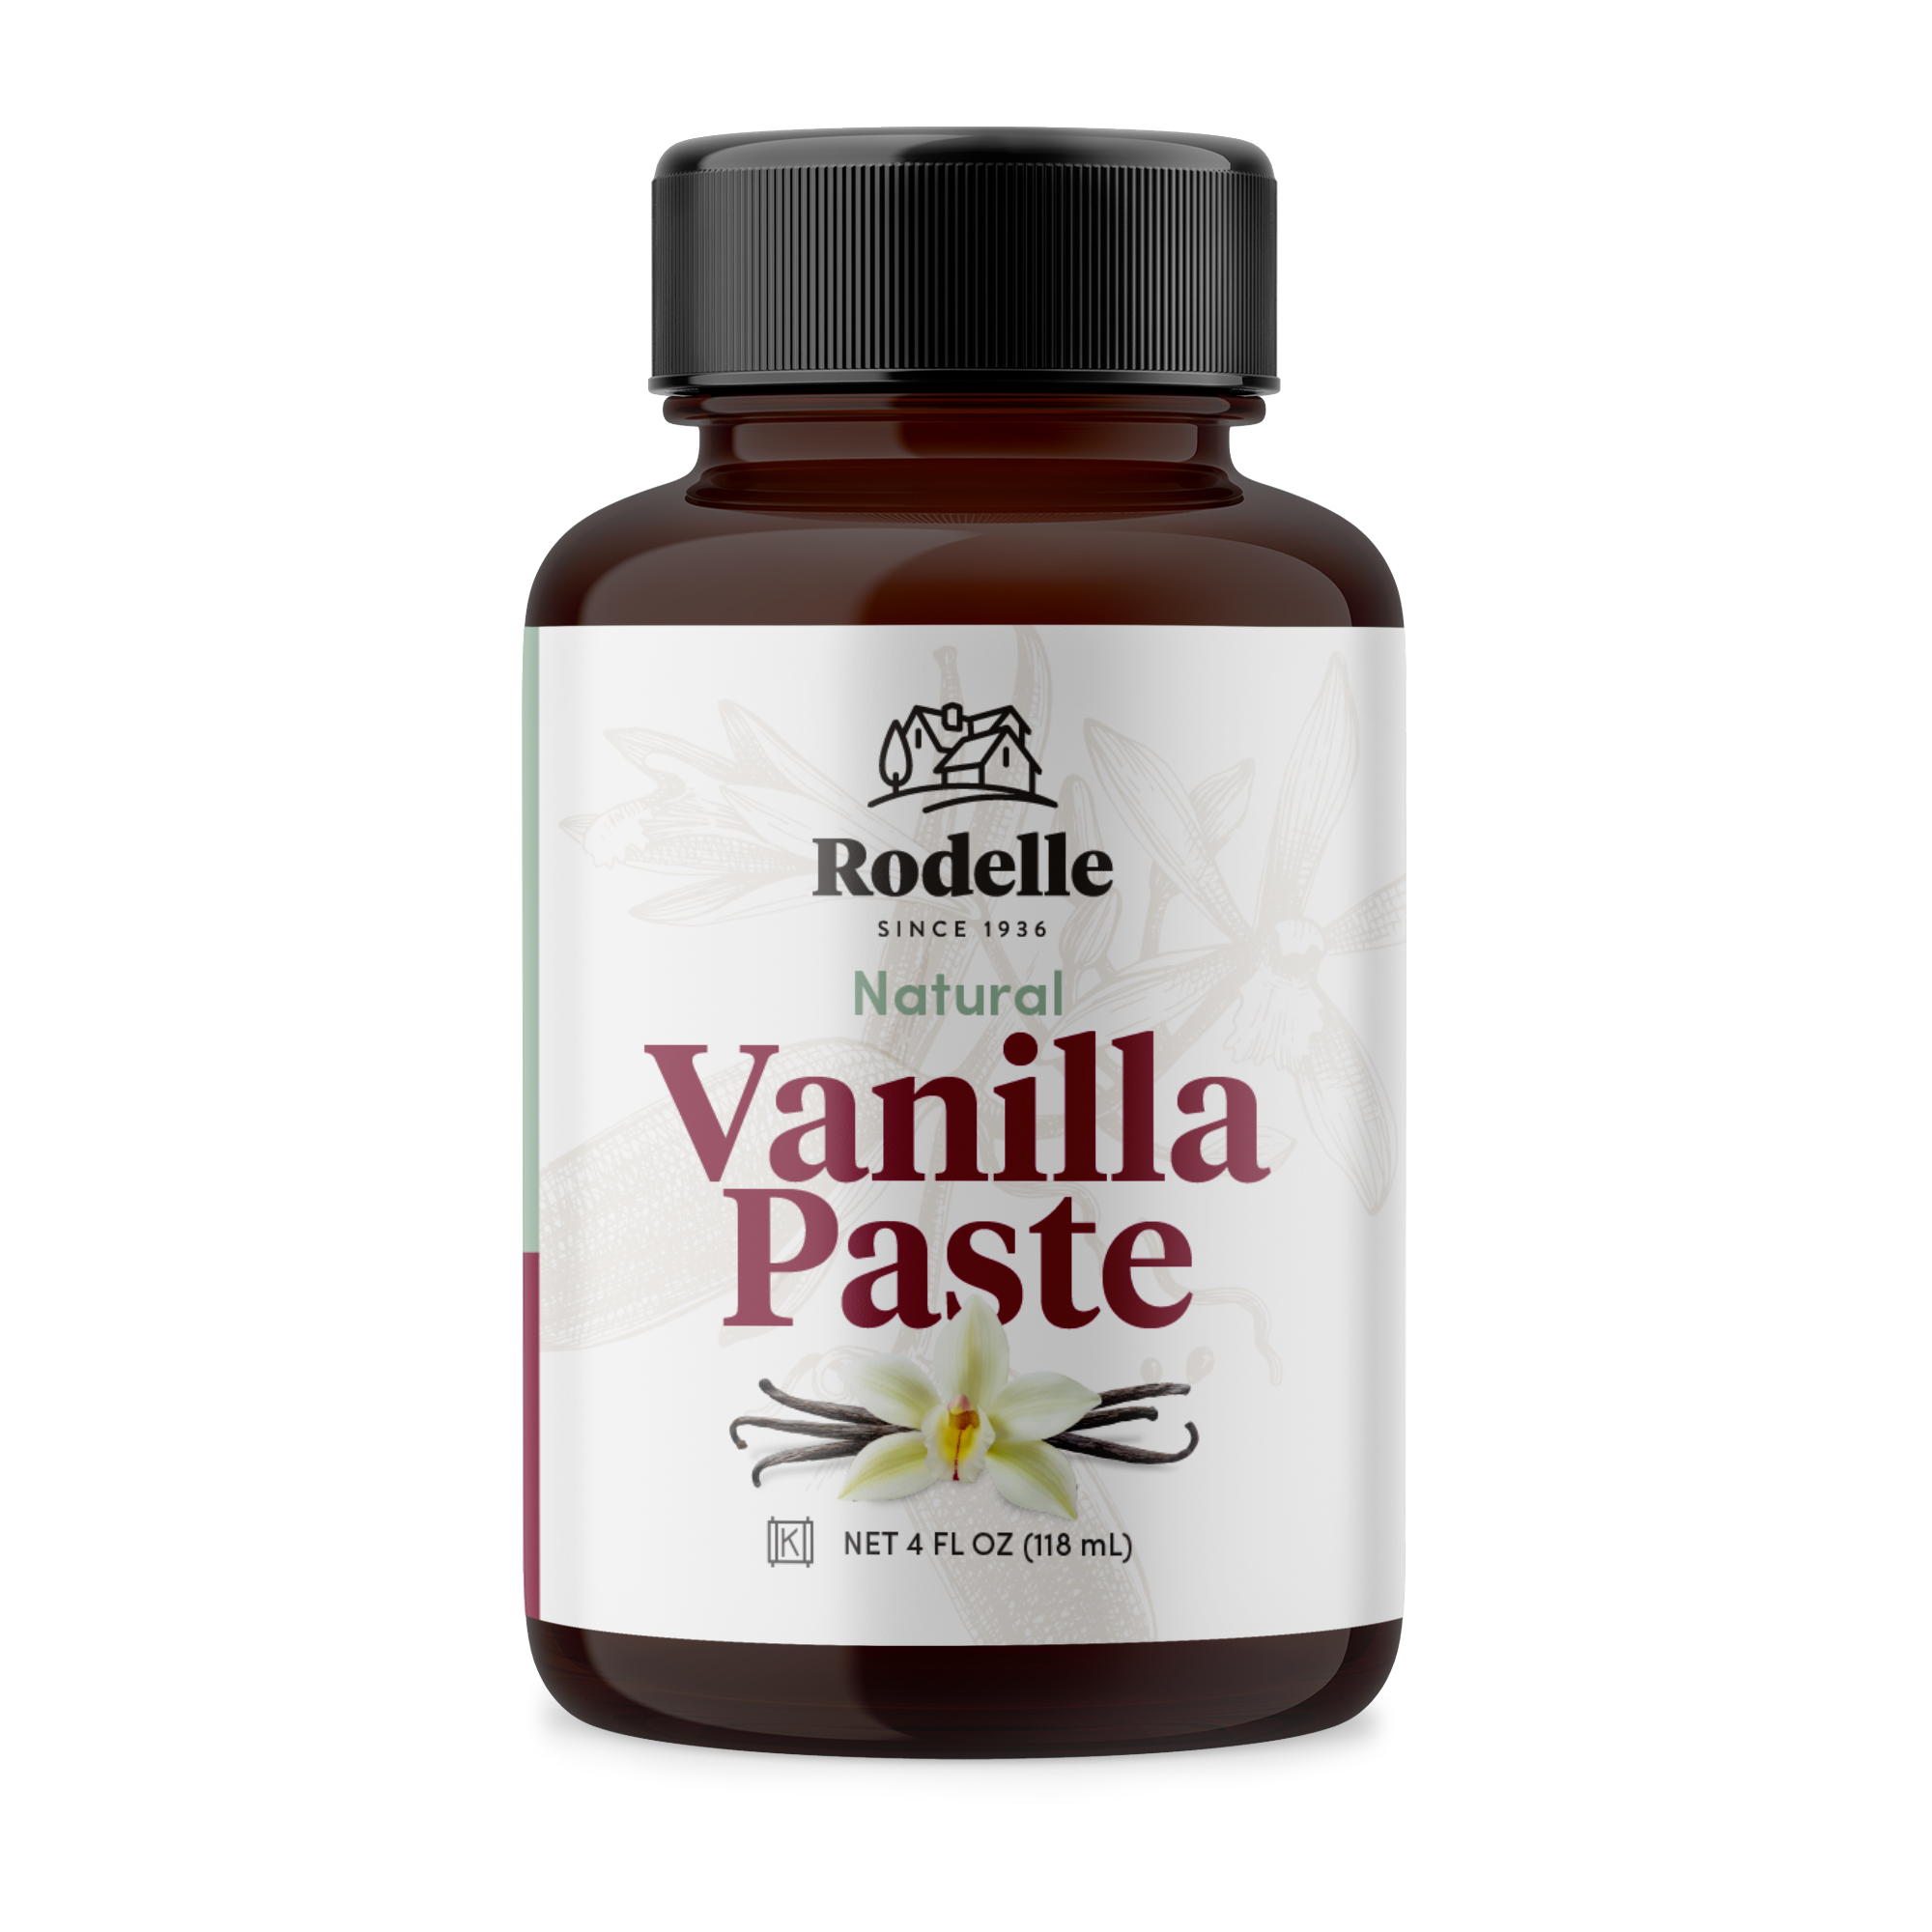 Rodelle All Natural Vanilla Paste, 4 fl oz, Baking Extract - image 1 of 8